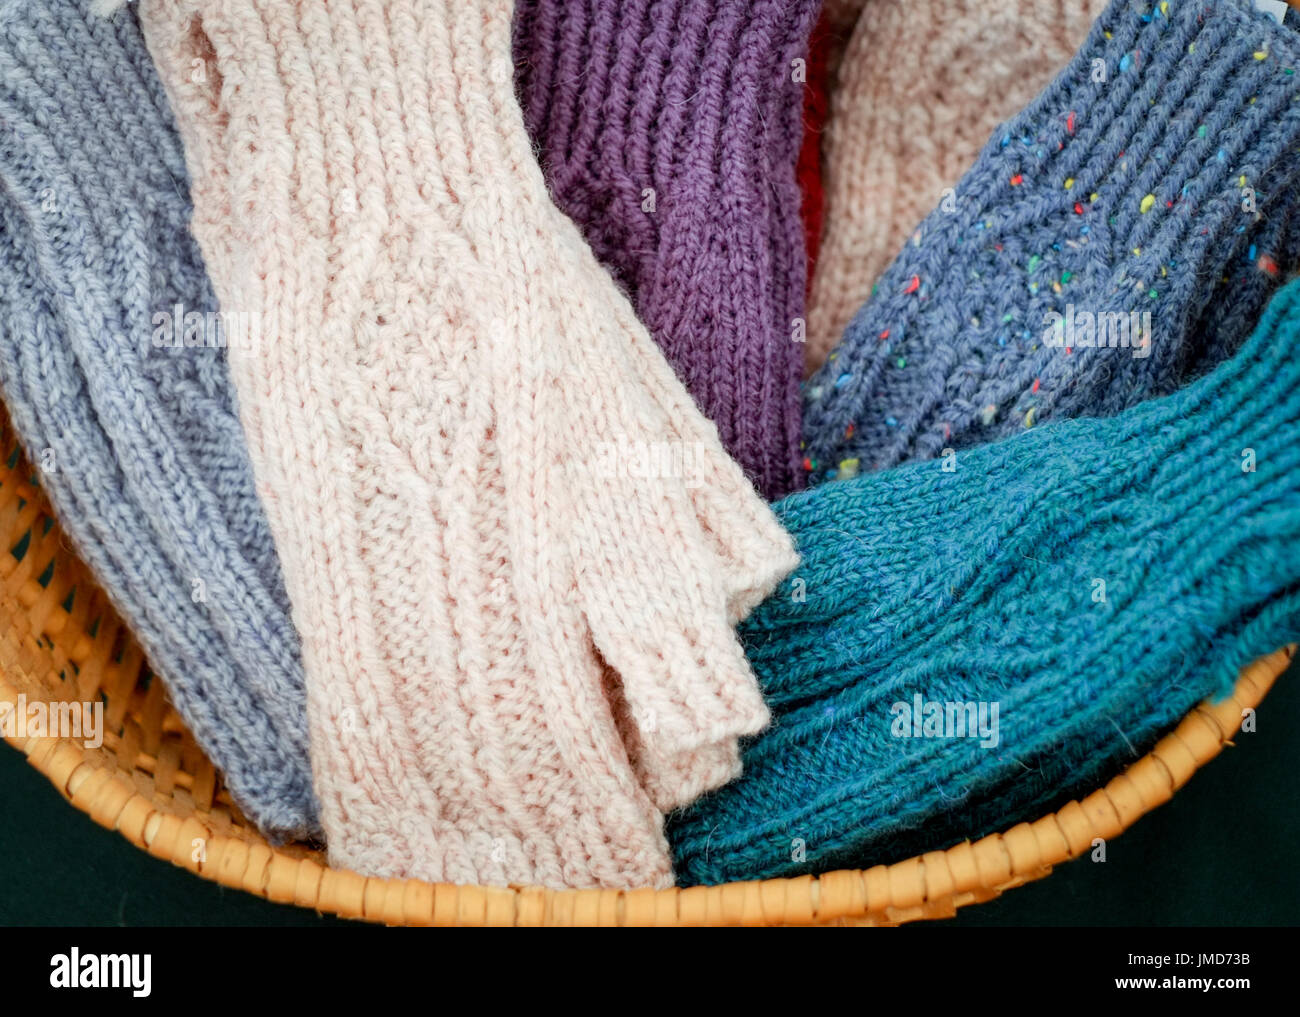 Craftwork displaying hsnd-knitted mittens presented in a basket. Stock Photo